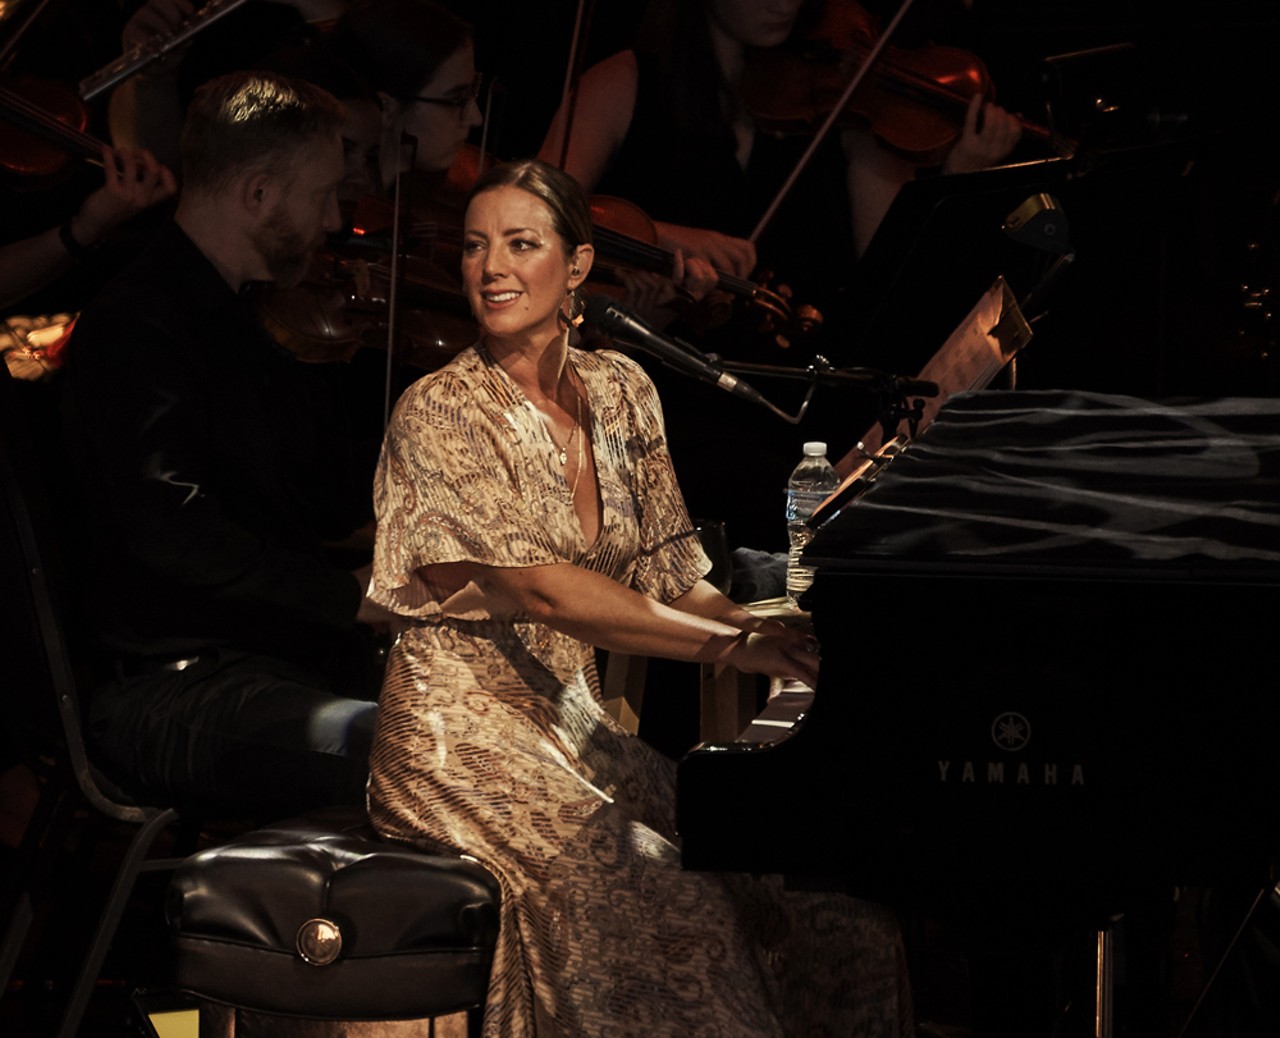 Everything we saw at the Sarah McLachlan show at Meadow Brook Amphitheatre